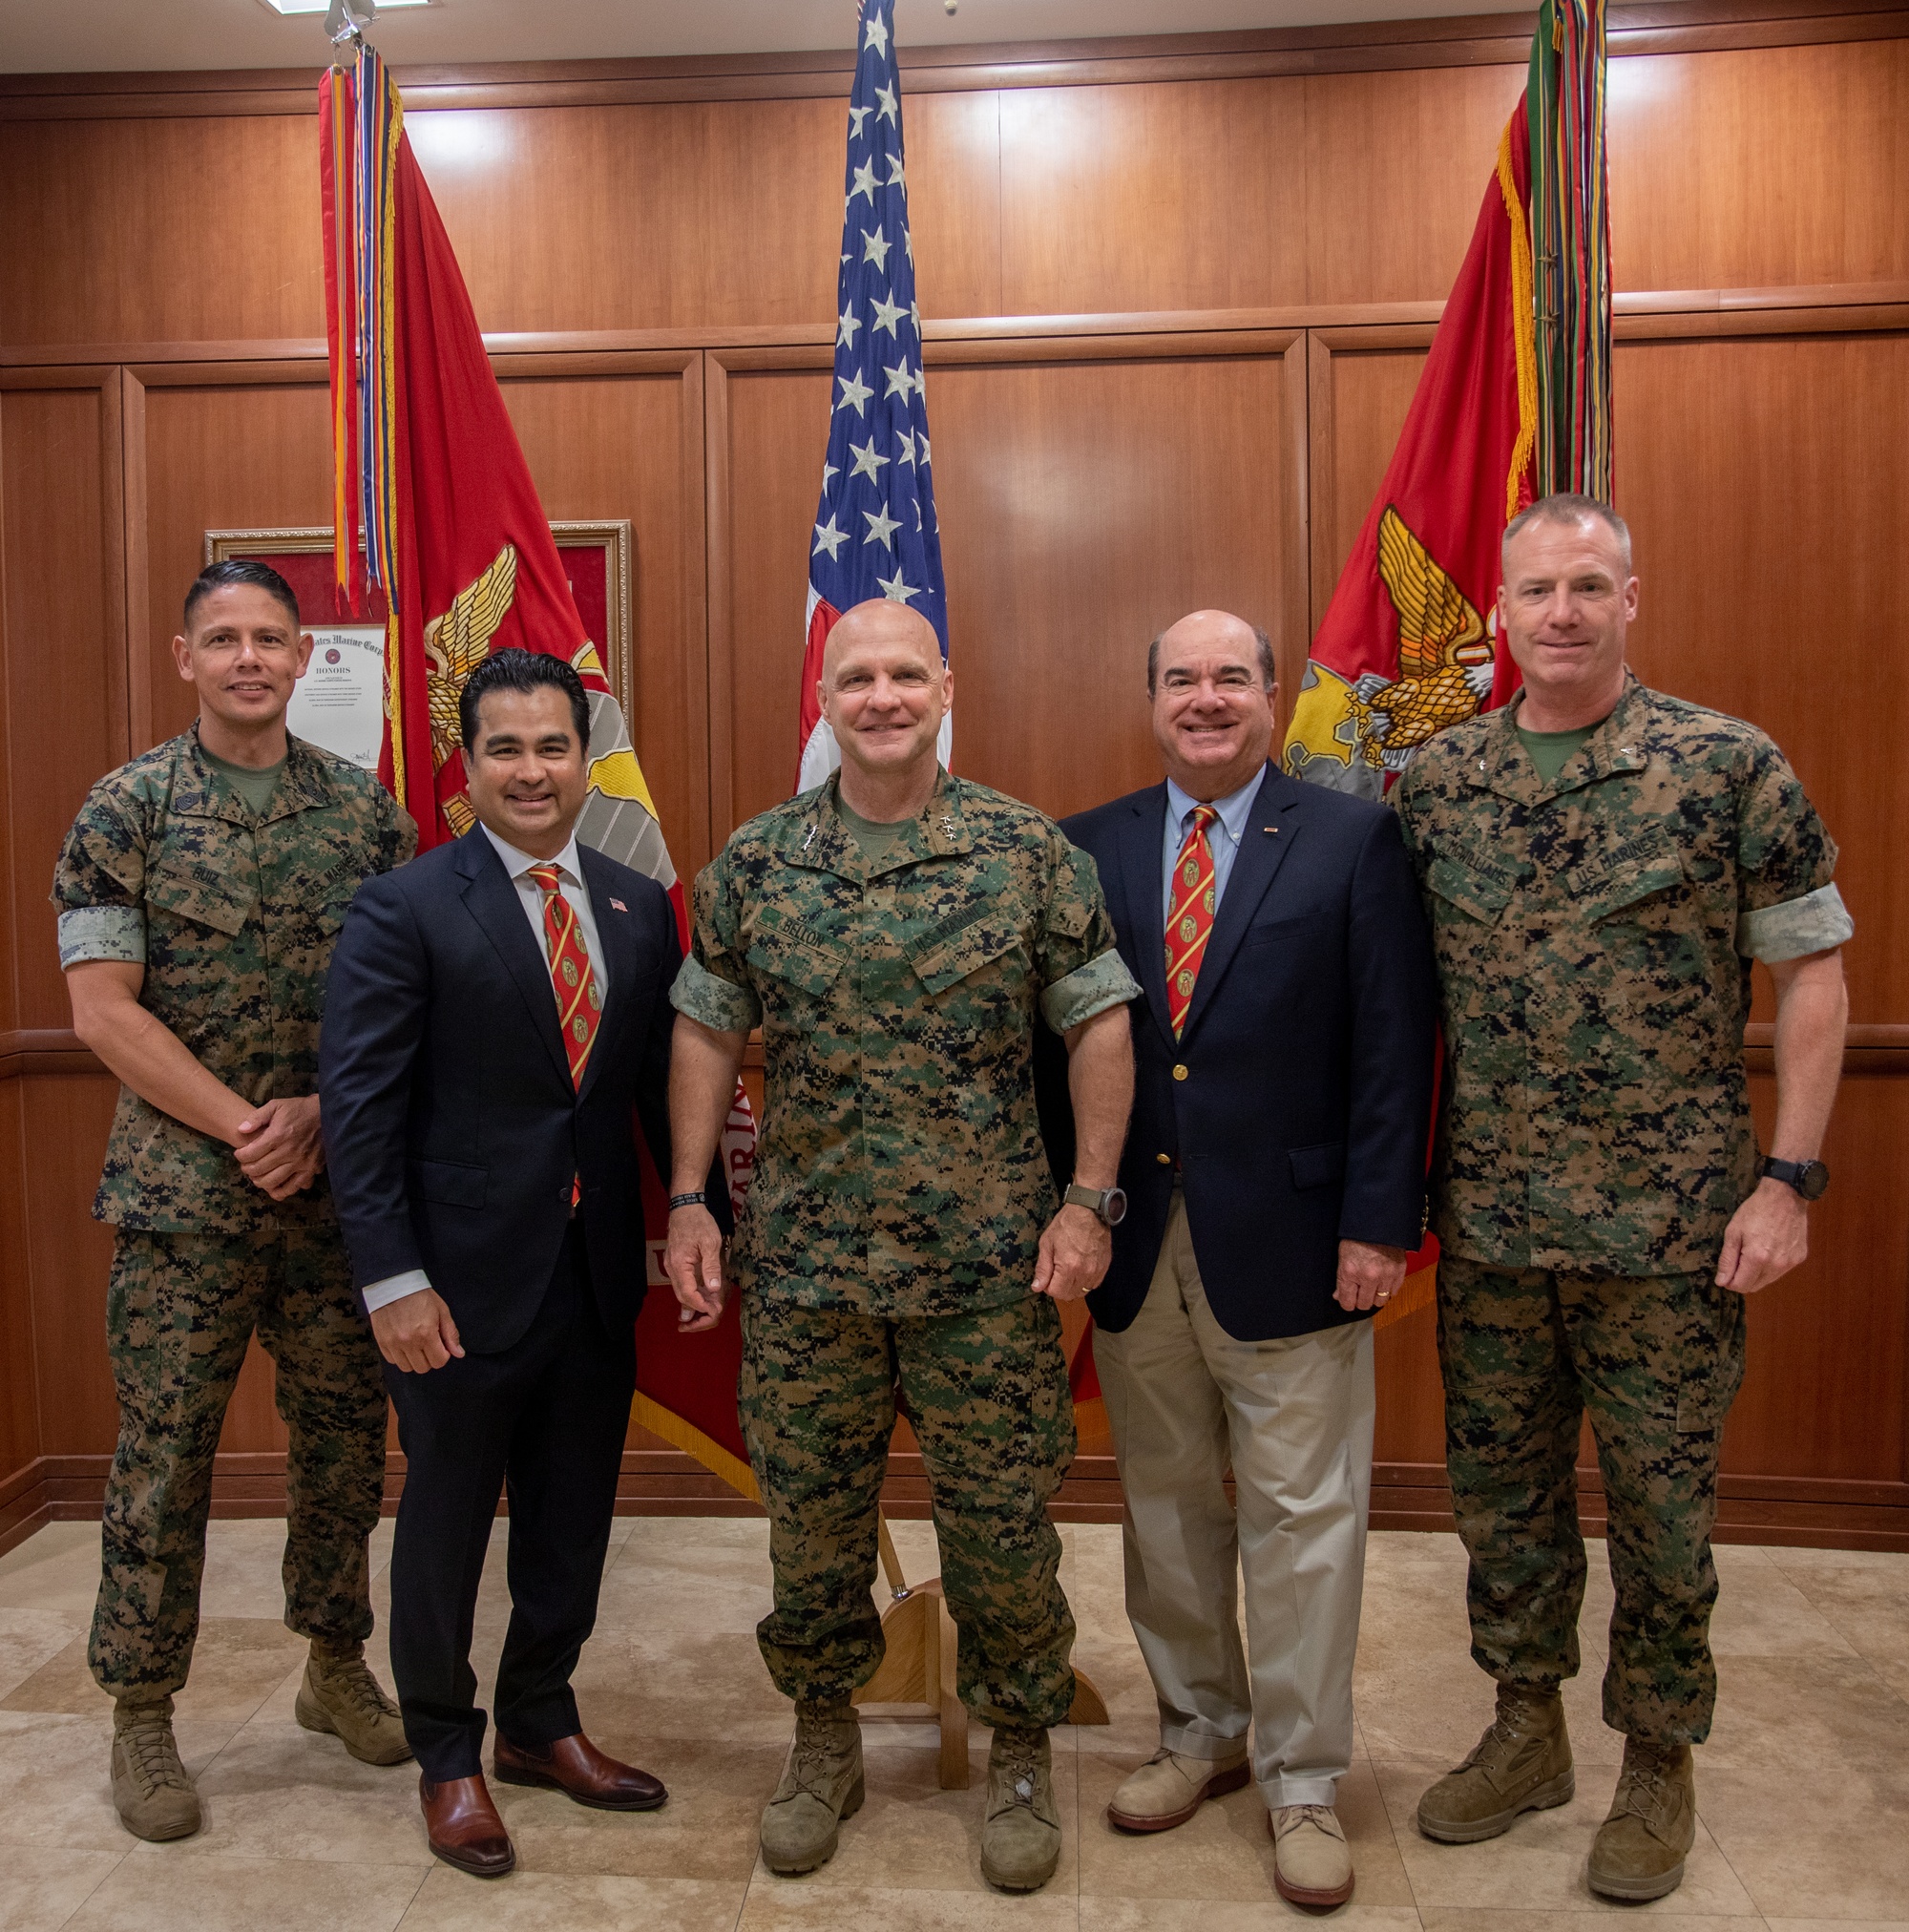 DVIDS - Images - Marine Corps Support Facility Leadership Meets